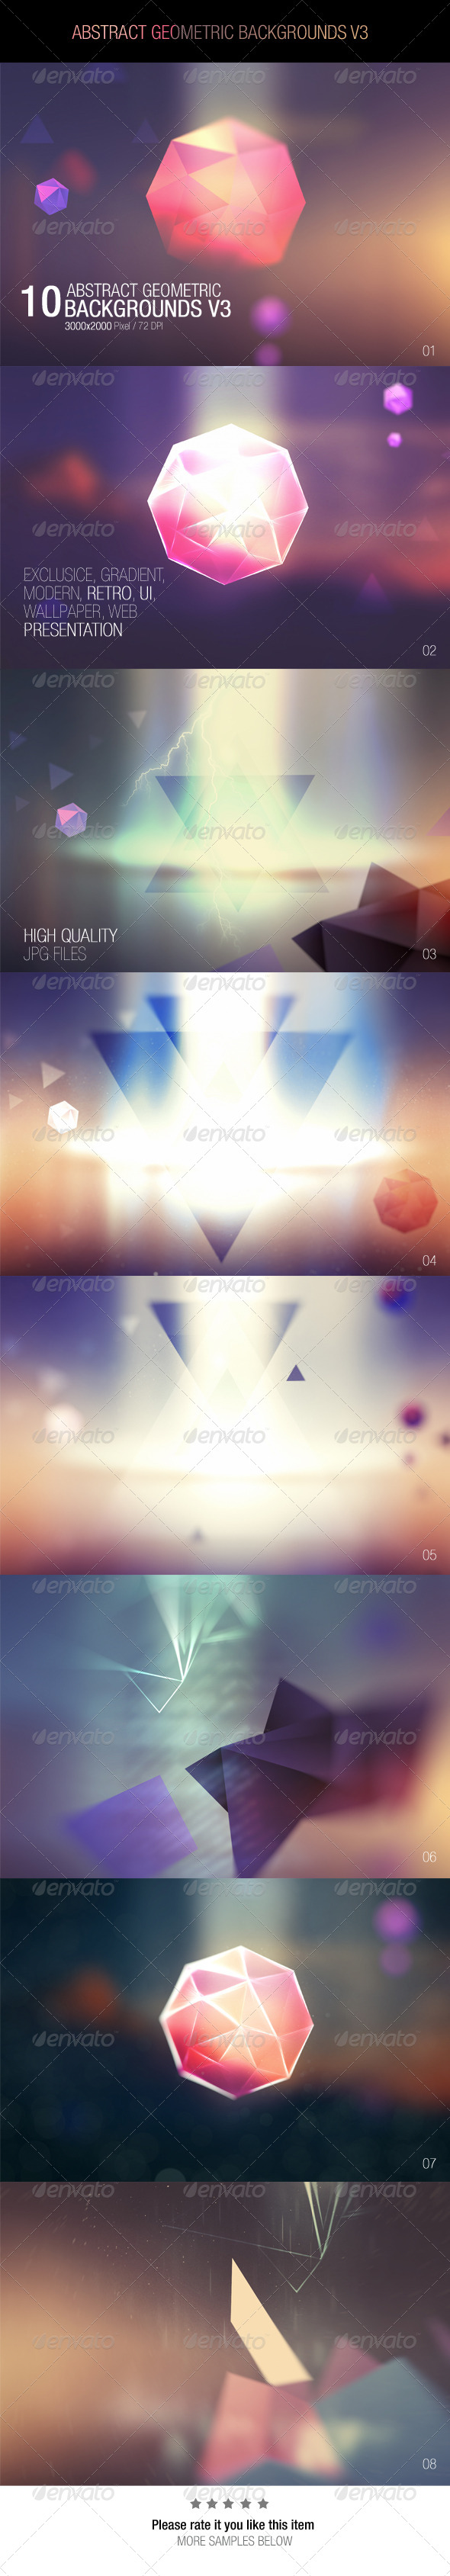 GraphicRiver Abstract Geometric Backgrounds V3 7710031